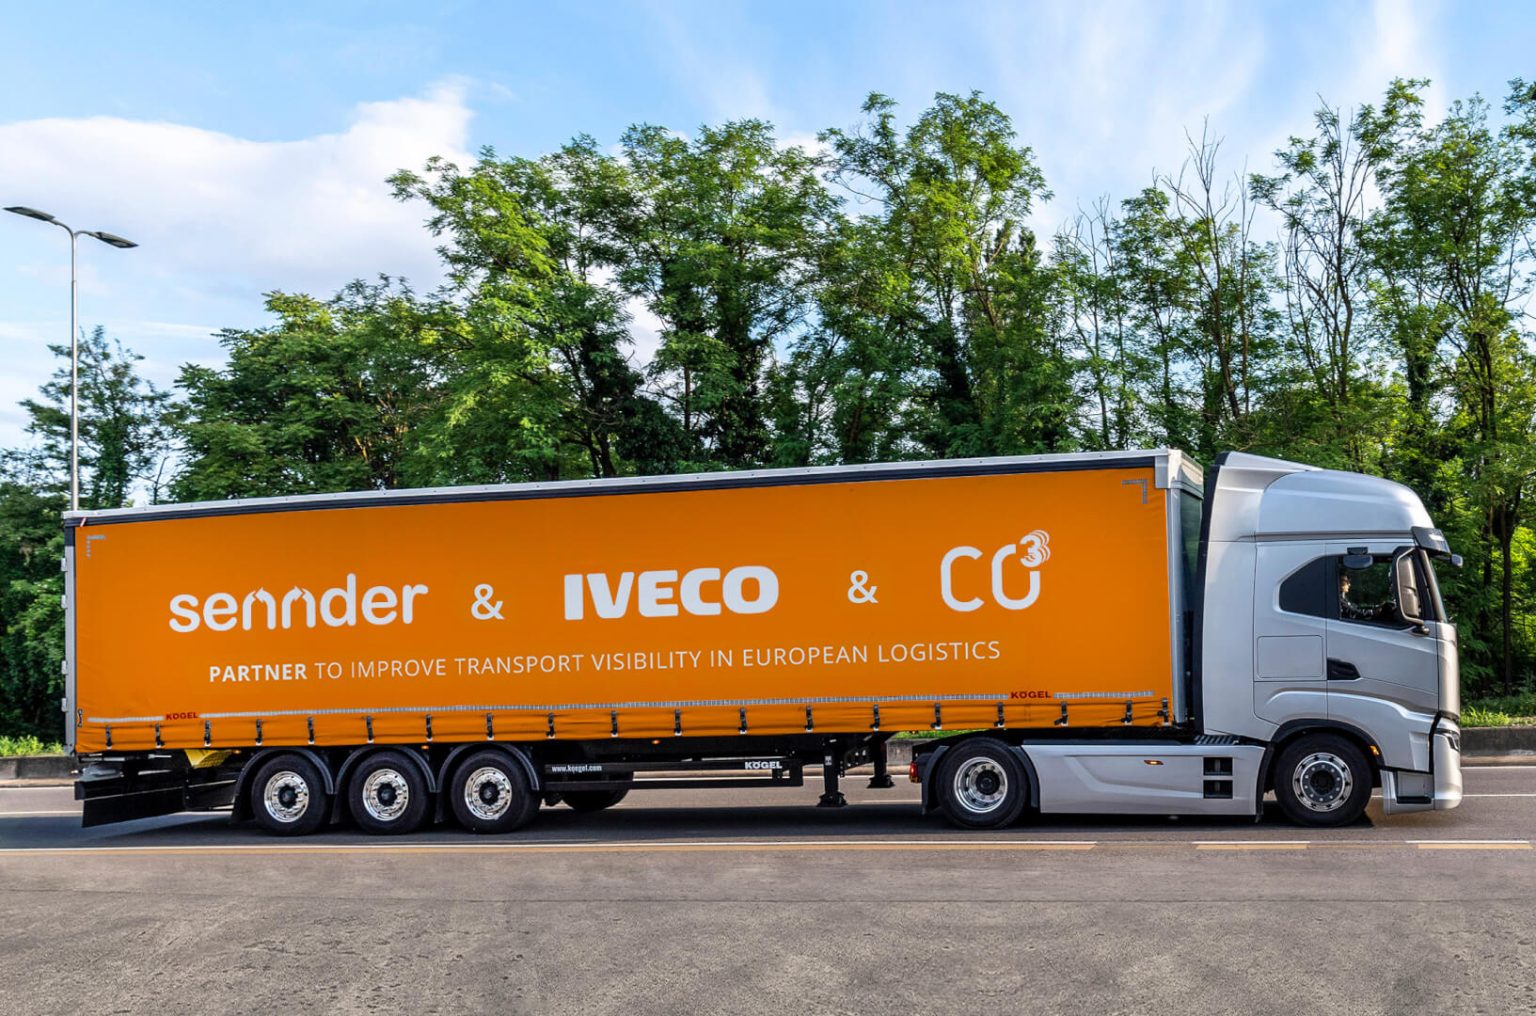 IVECO, Sennder, And CO3 Co-Develop New Tracking Solution